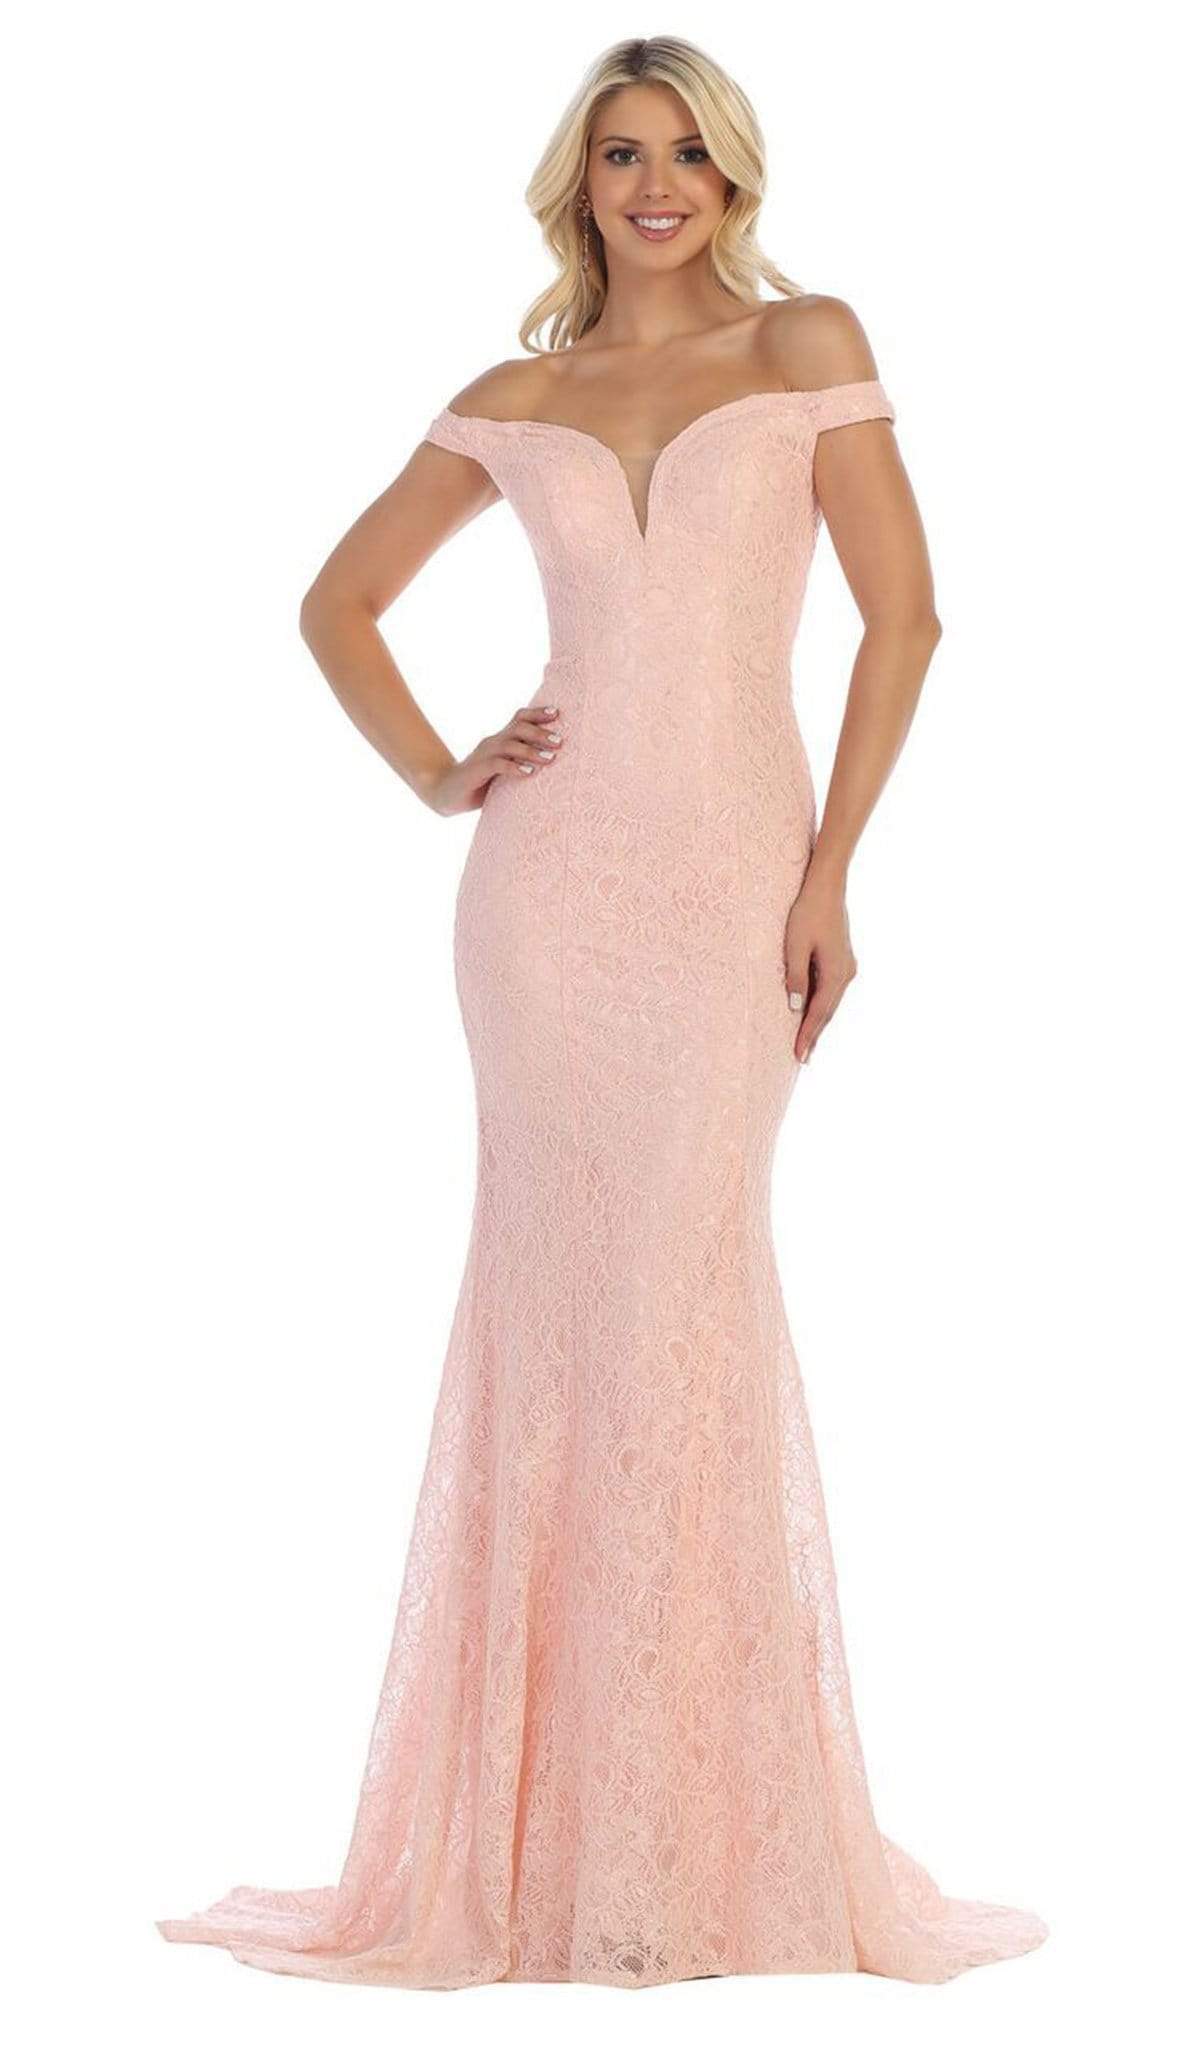 May Queen - MQ1596 Allover Lace Off Shoulder Lace Up back Mermaid Gown Bridesmaid Dresses 4 / Blush